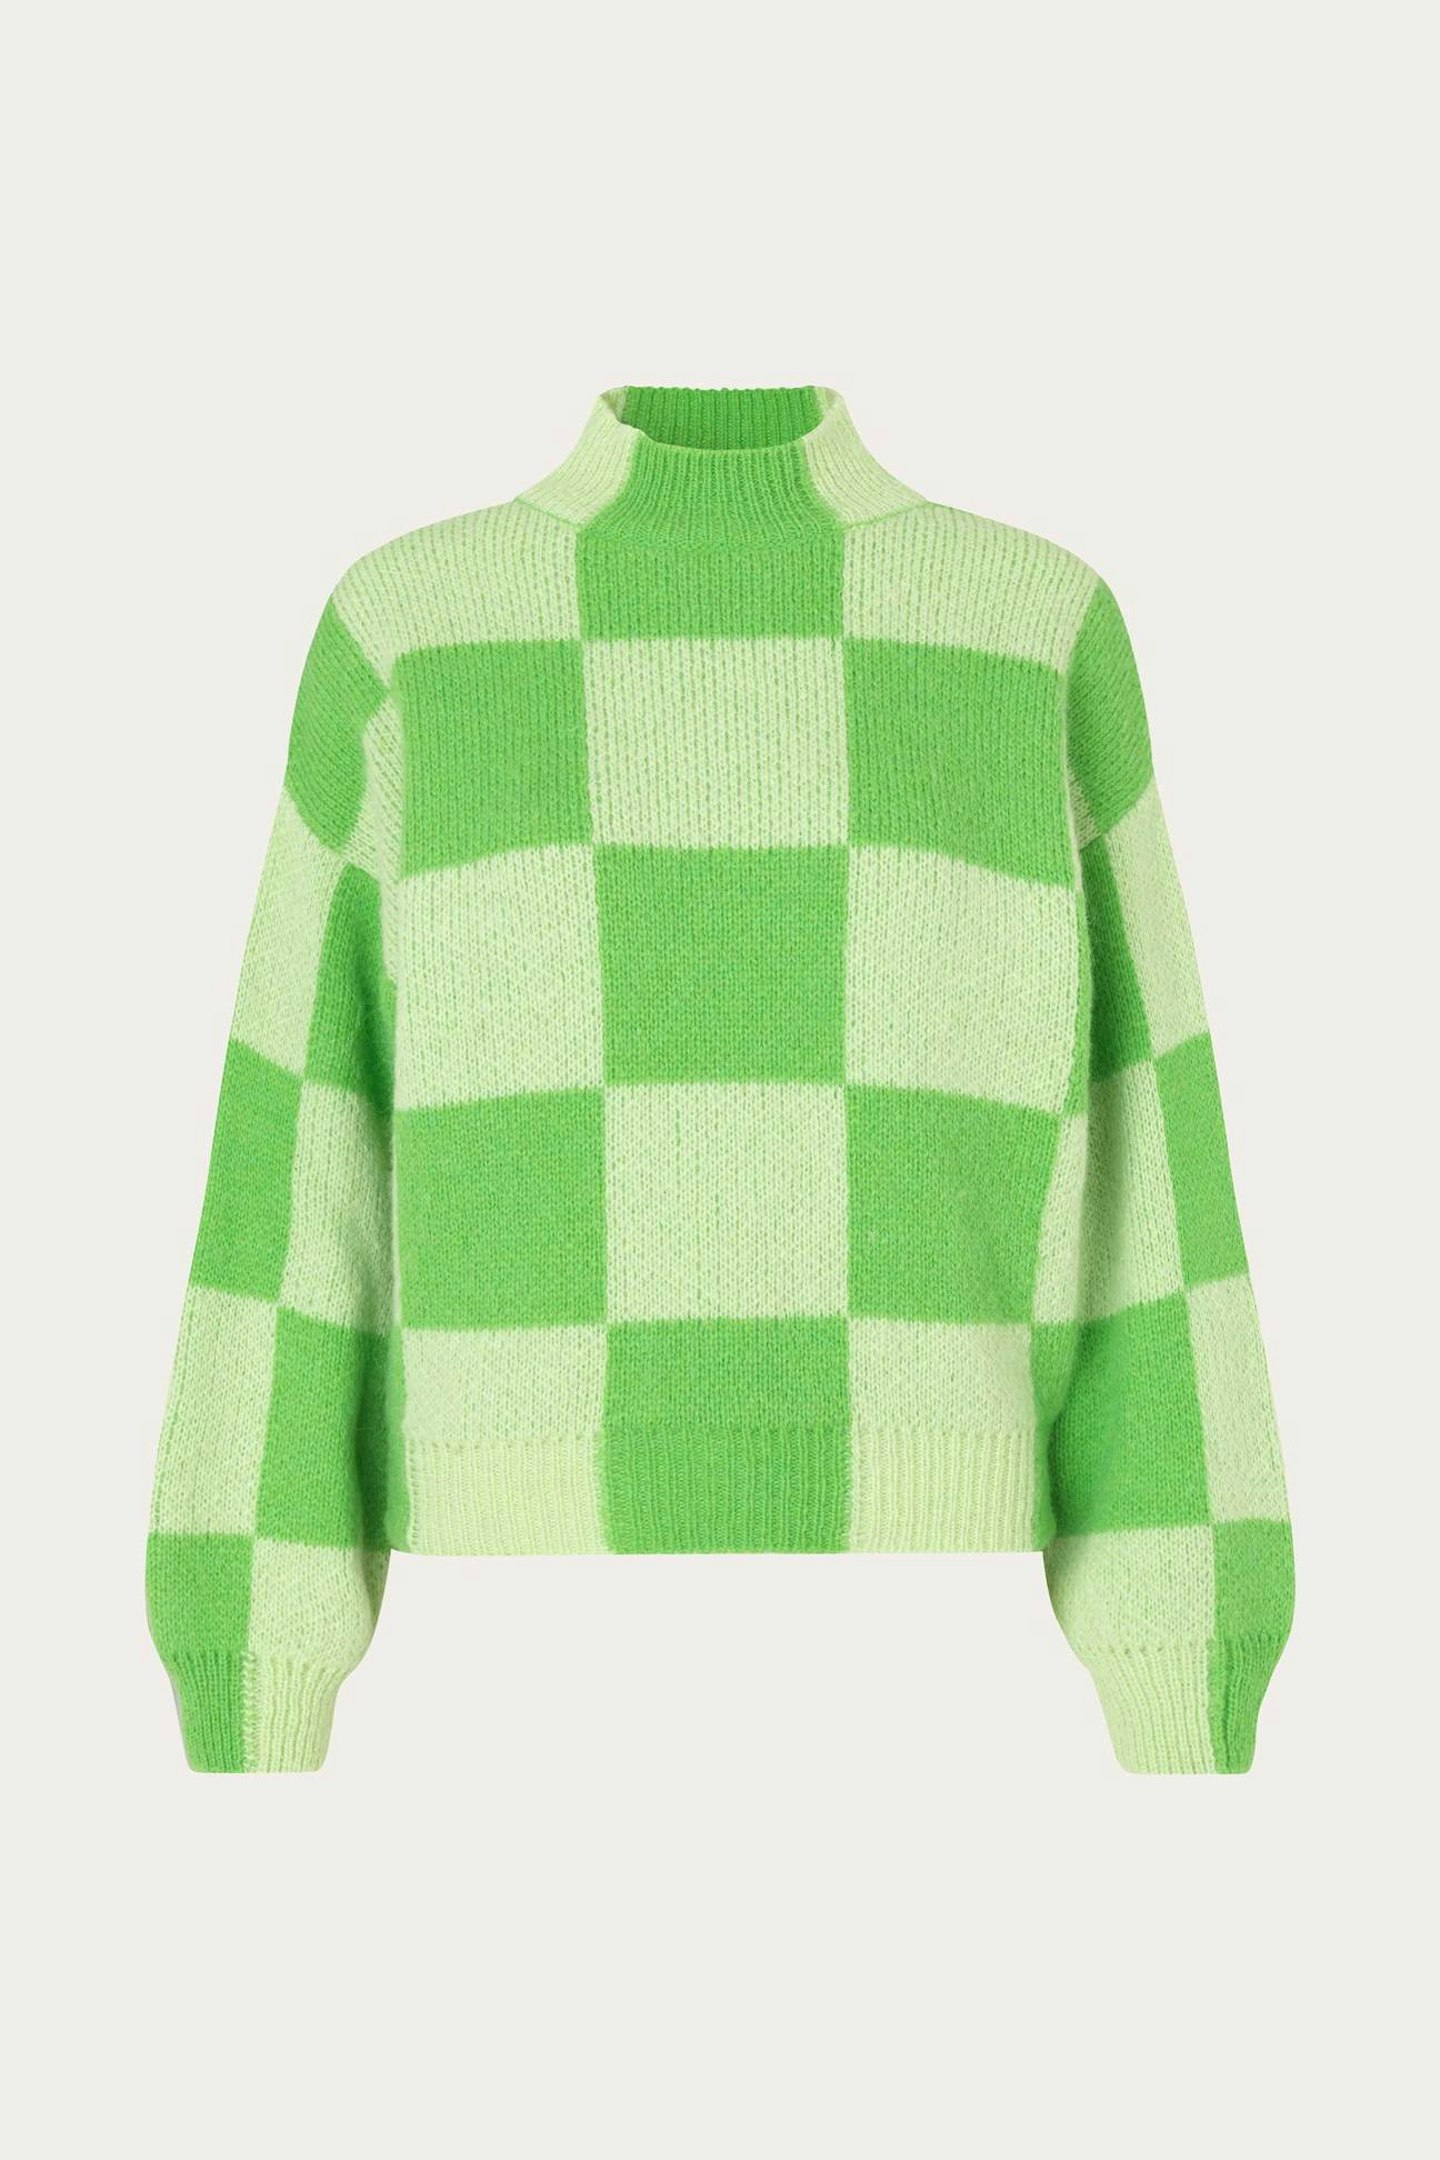 Adonis Sweater Lime, £210